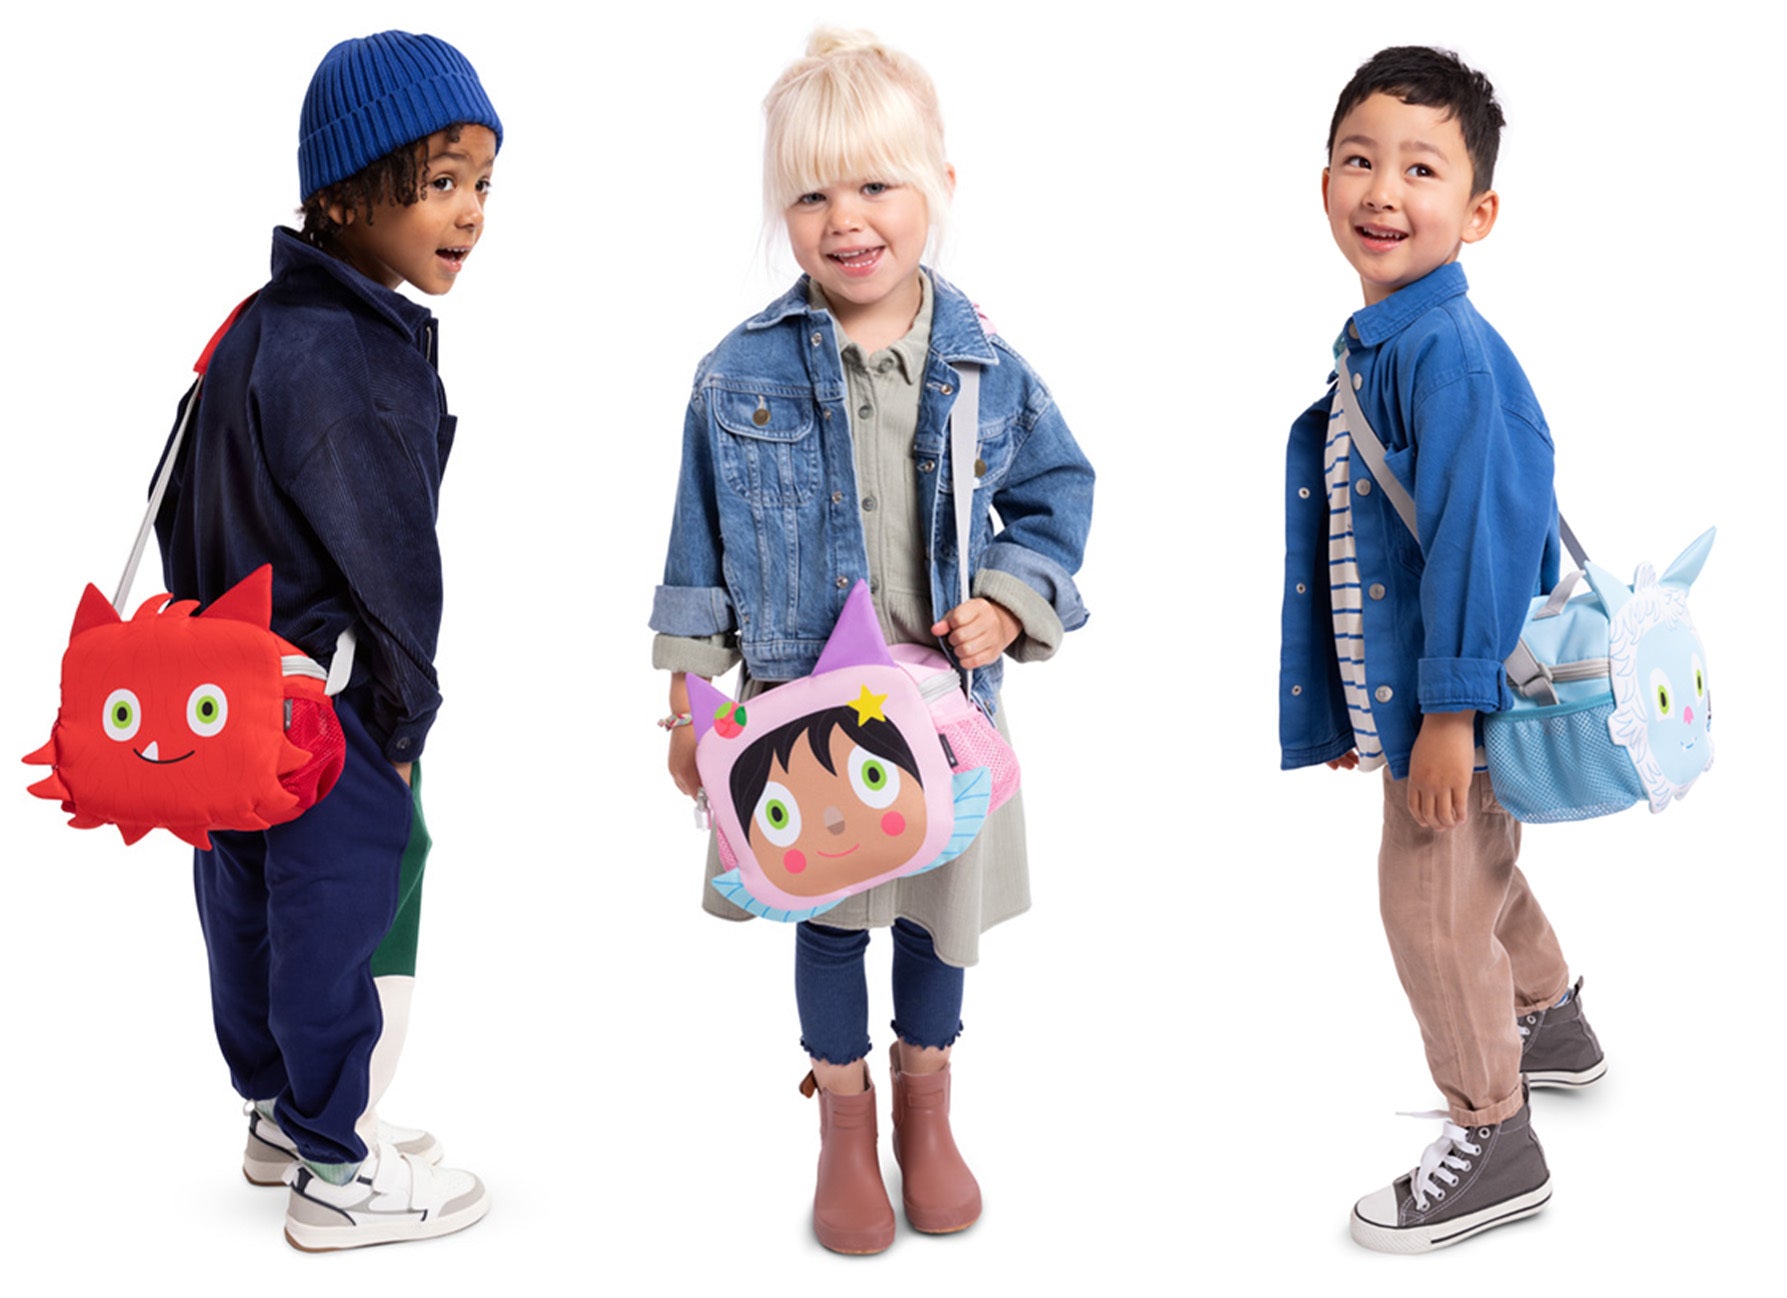 Three children with Character Bags over their shoulders